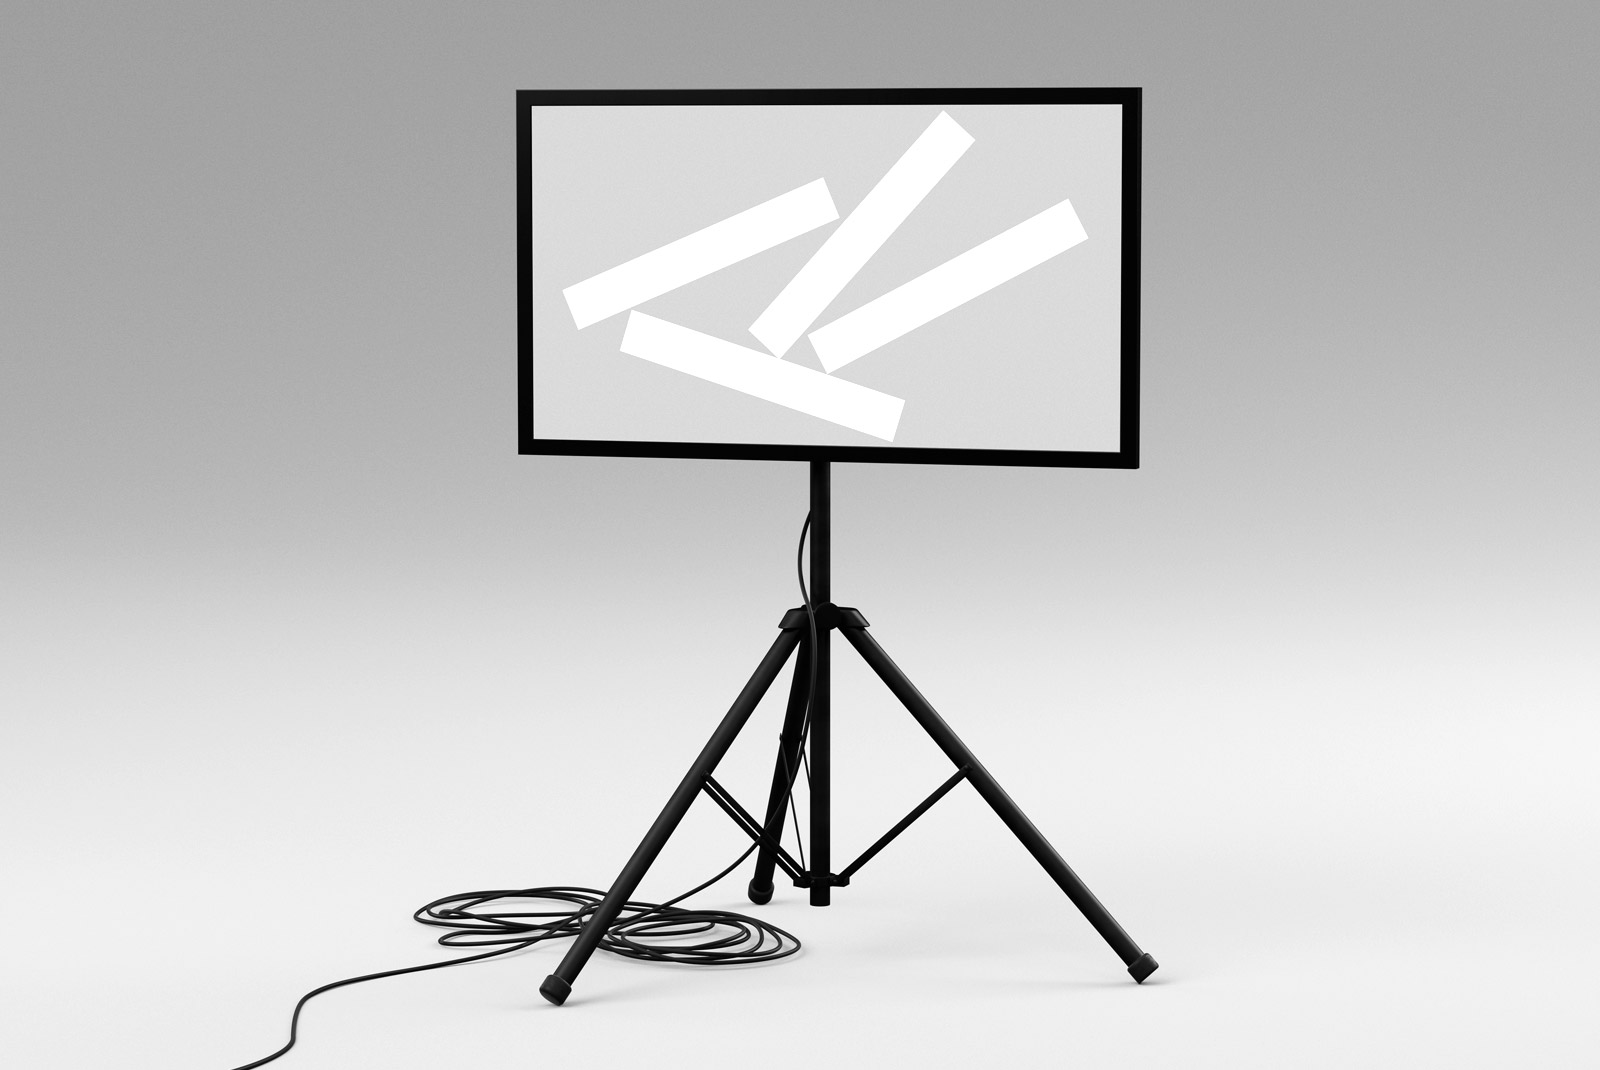 Modern digital art mockup display on tripod stand with abstract graphics, ideal for presentations and portfolios, isolated on a gray background.